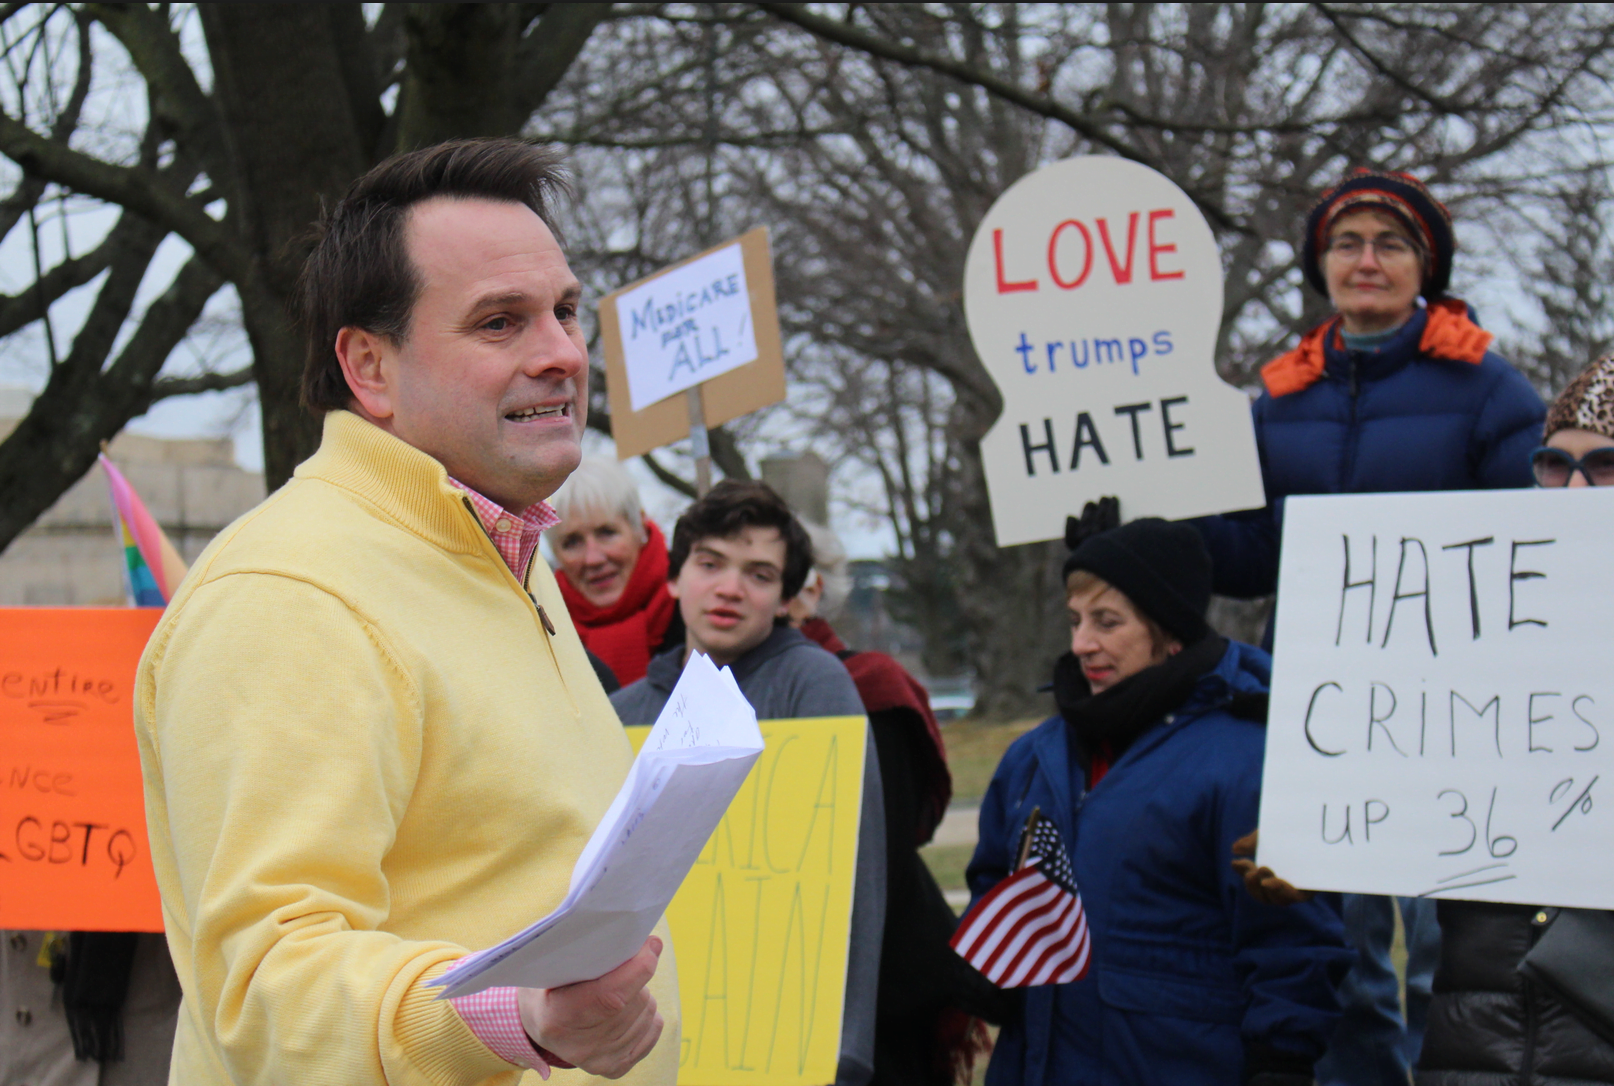 Drew Marzullo at the anti-hate demonstration